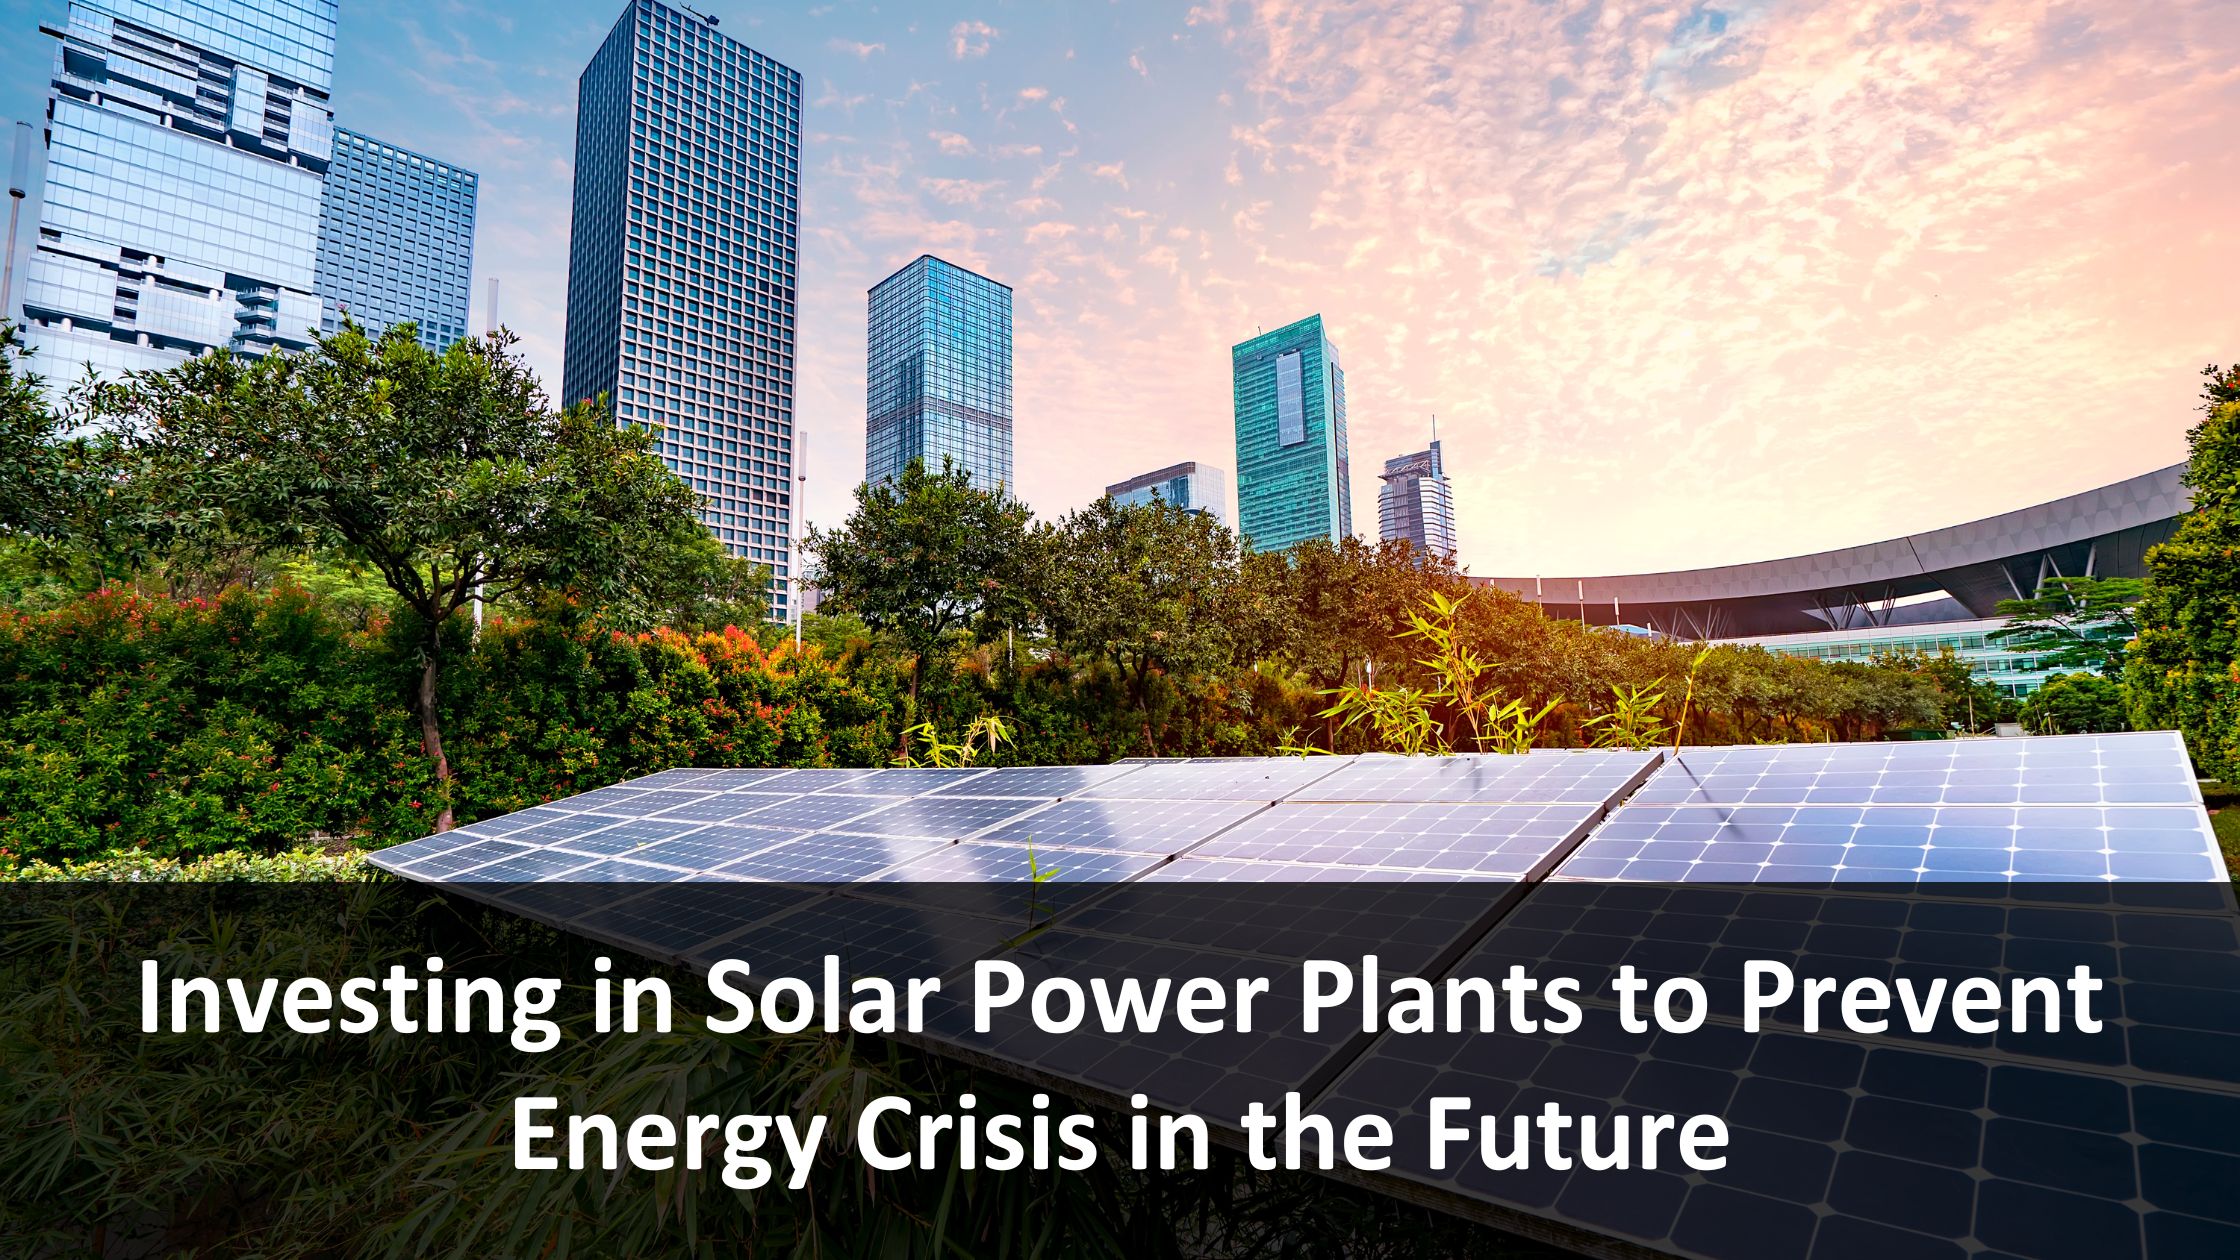 Investing in Solar Power Plants to Prevent Energy Crisis in the Future